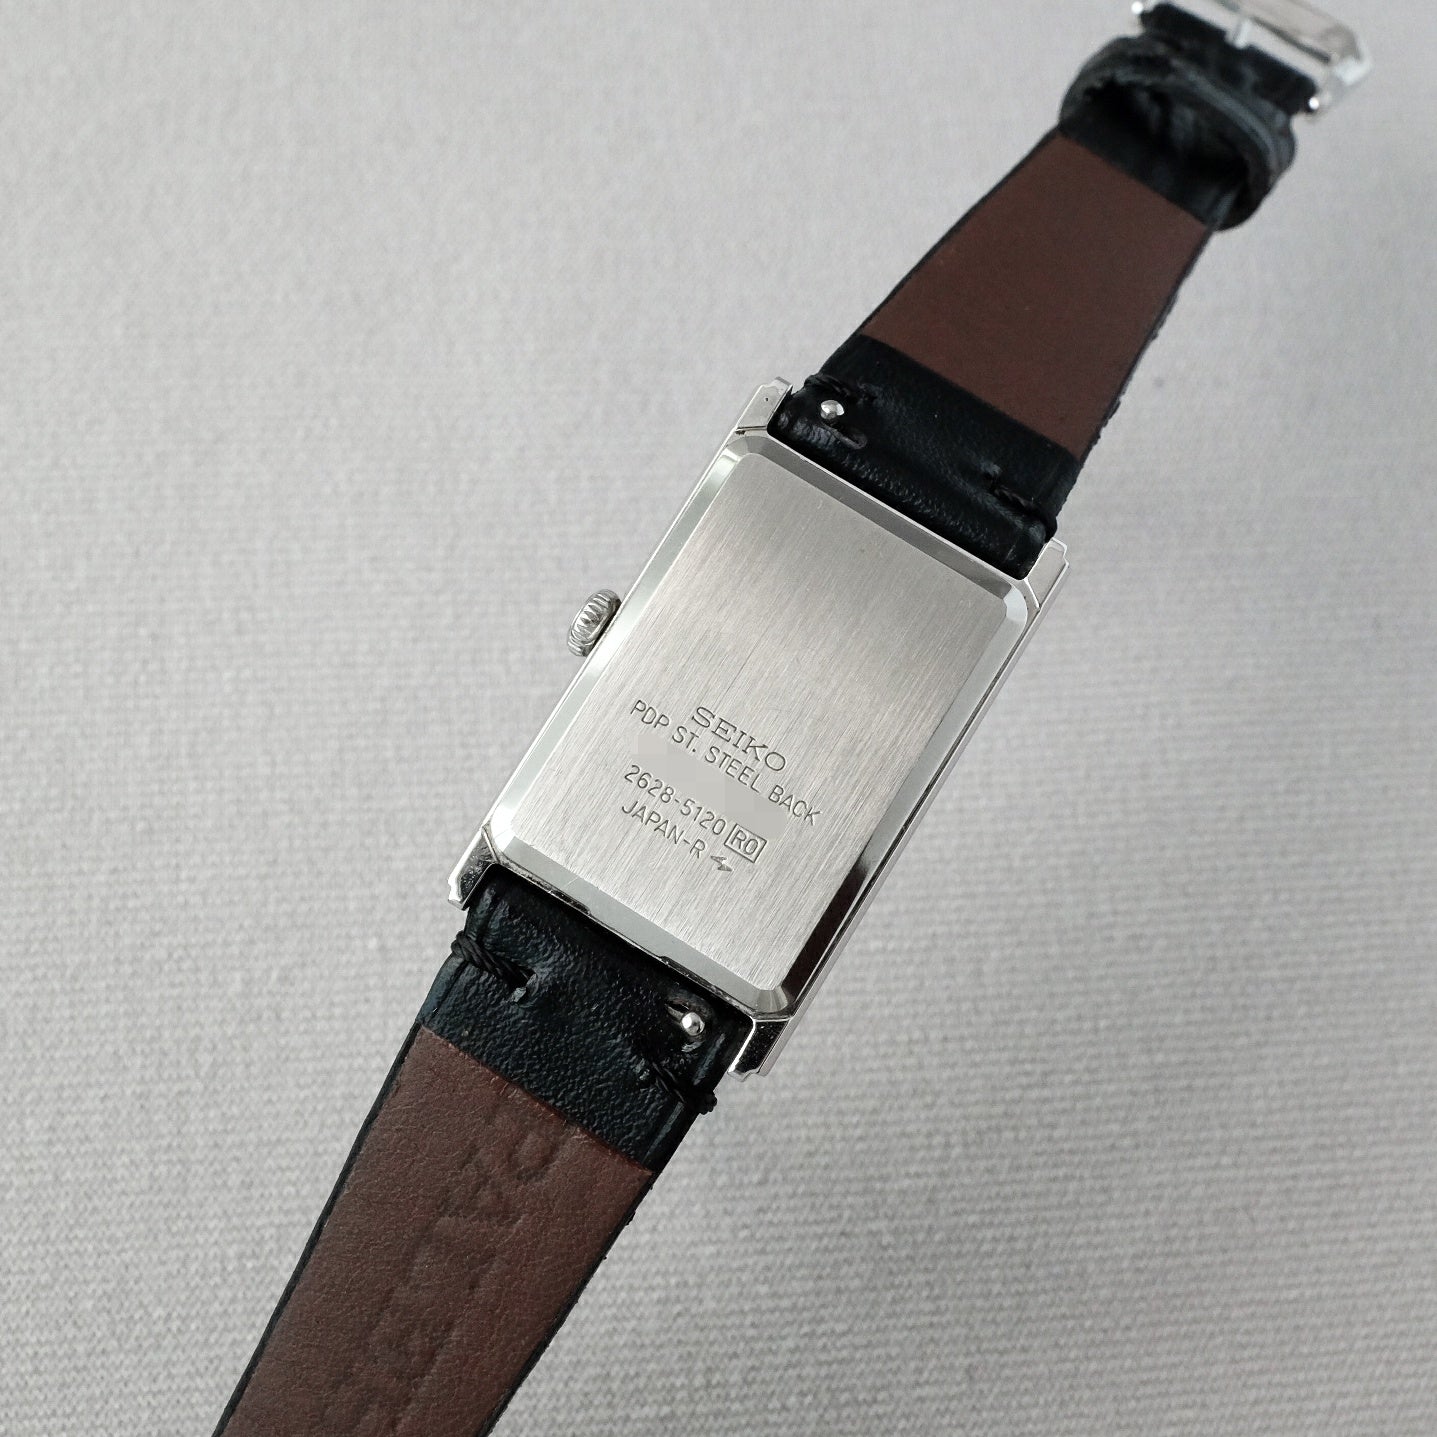 Seiko 2628-5120 from 1982 (Palladium plated case and buckle)